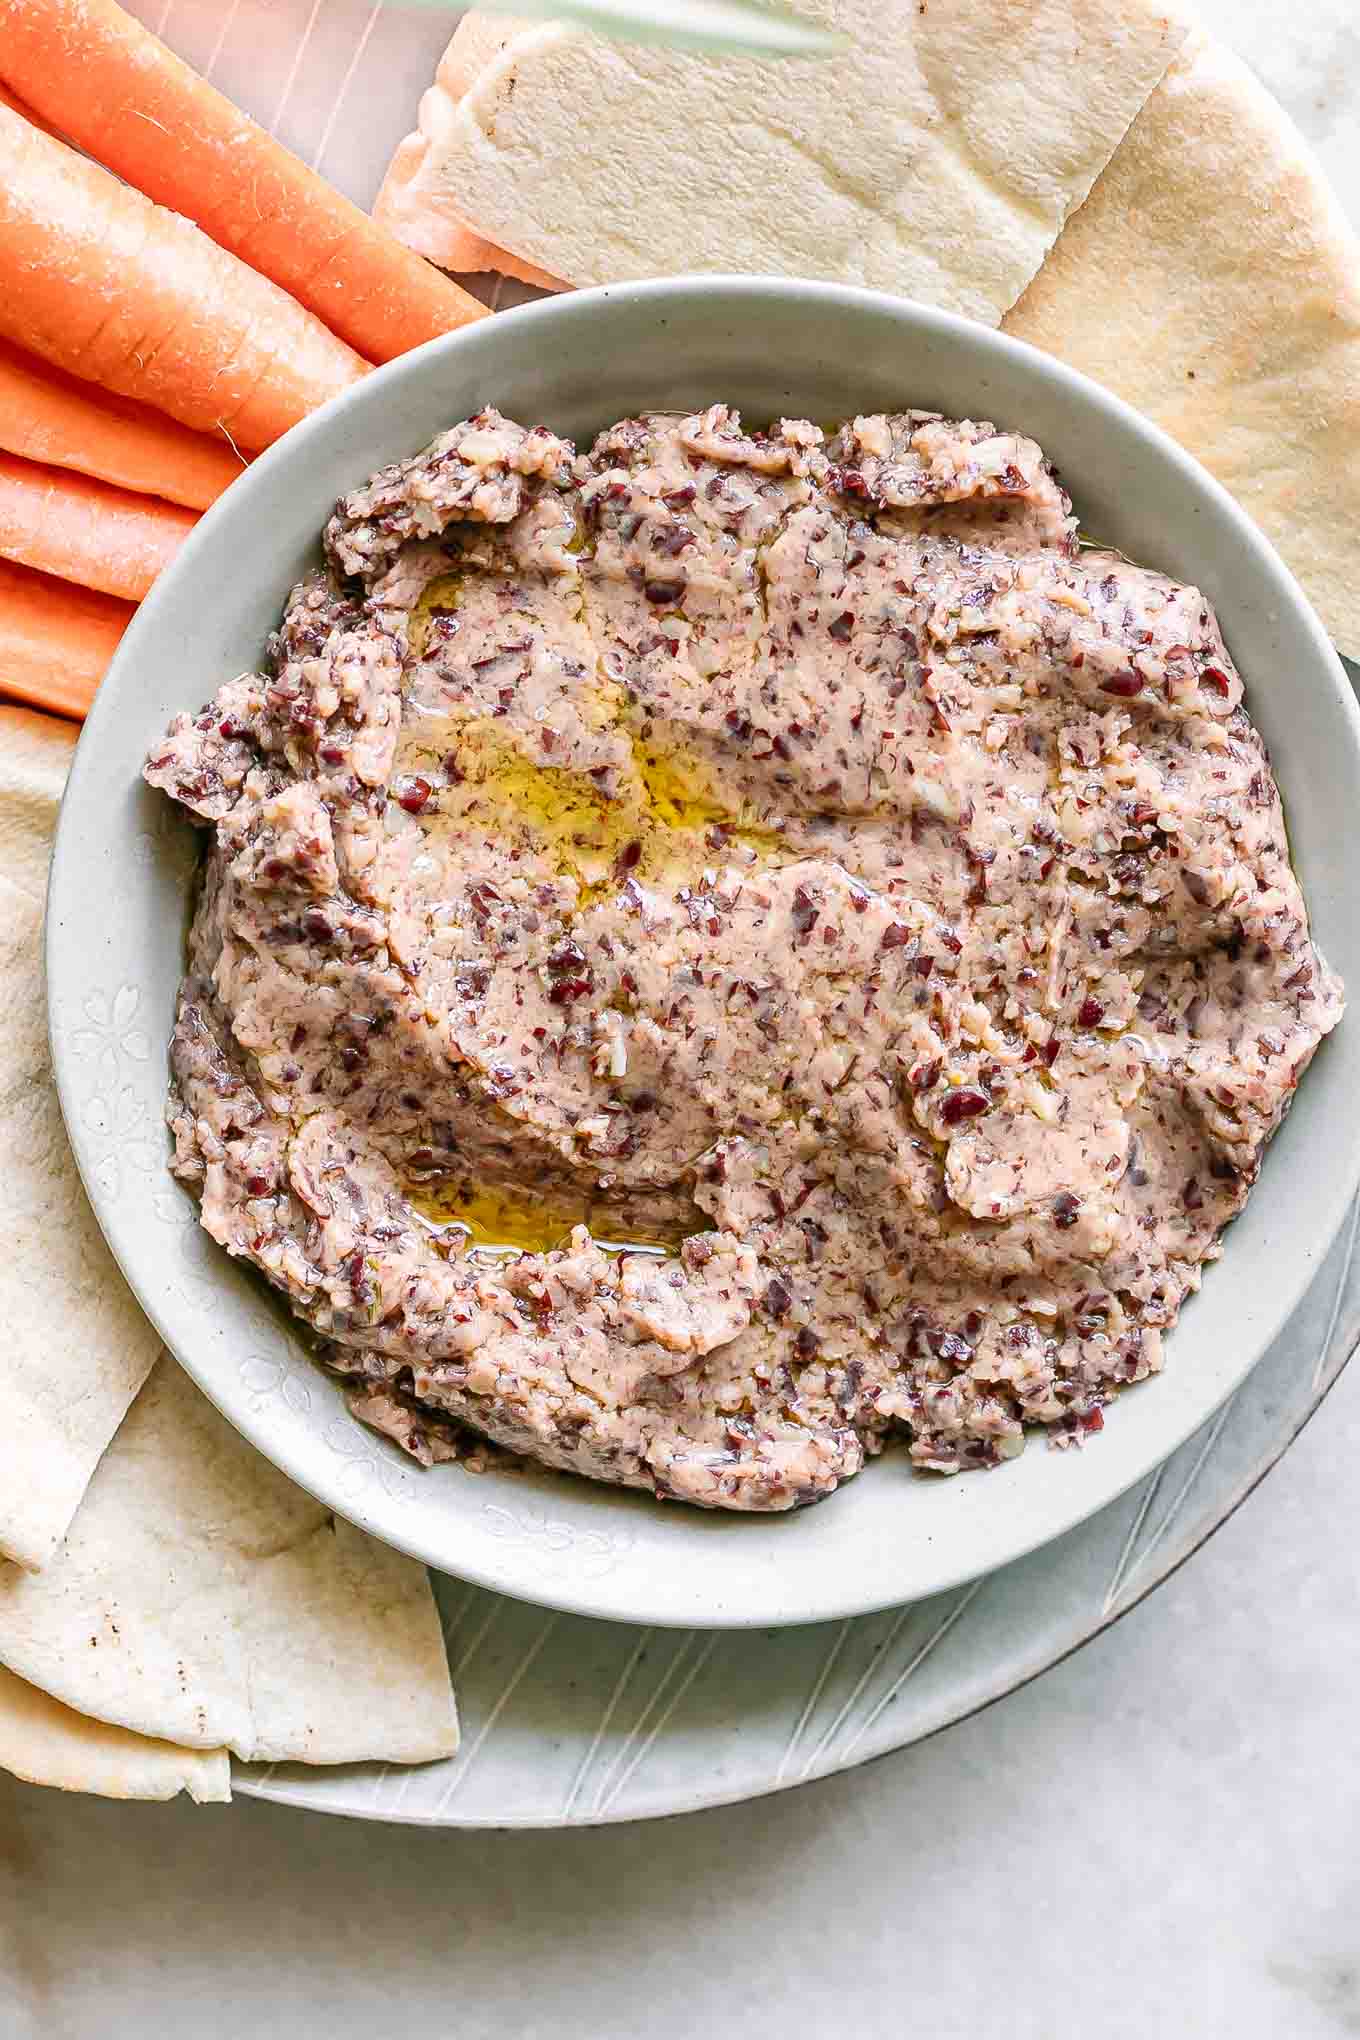 a bowl of kidney bean hummus on a plate with pita bread and carrot sticks